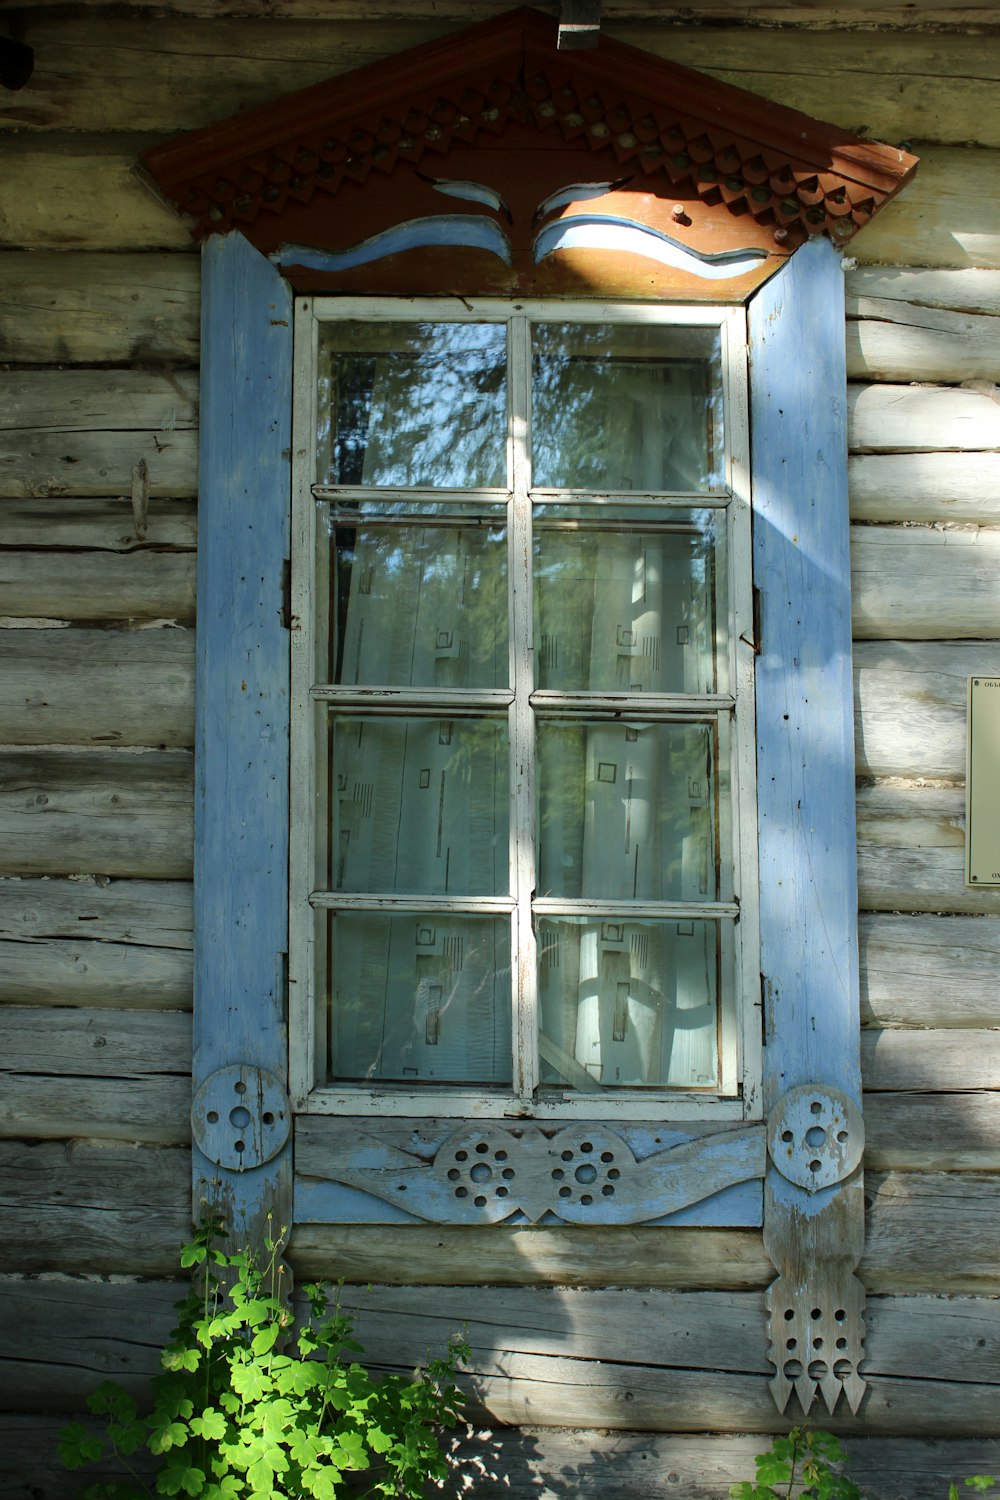 a window with a wooden frame and a wooden roof